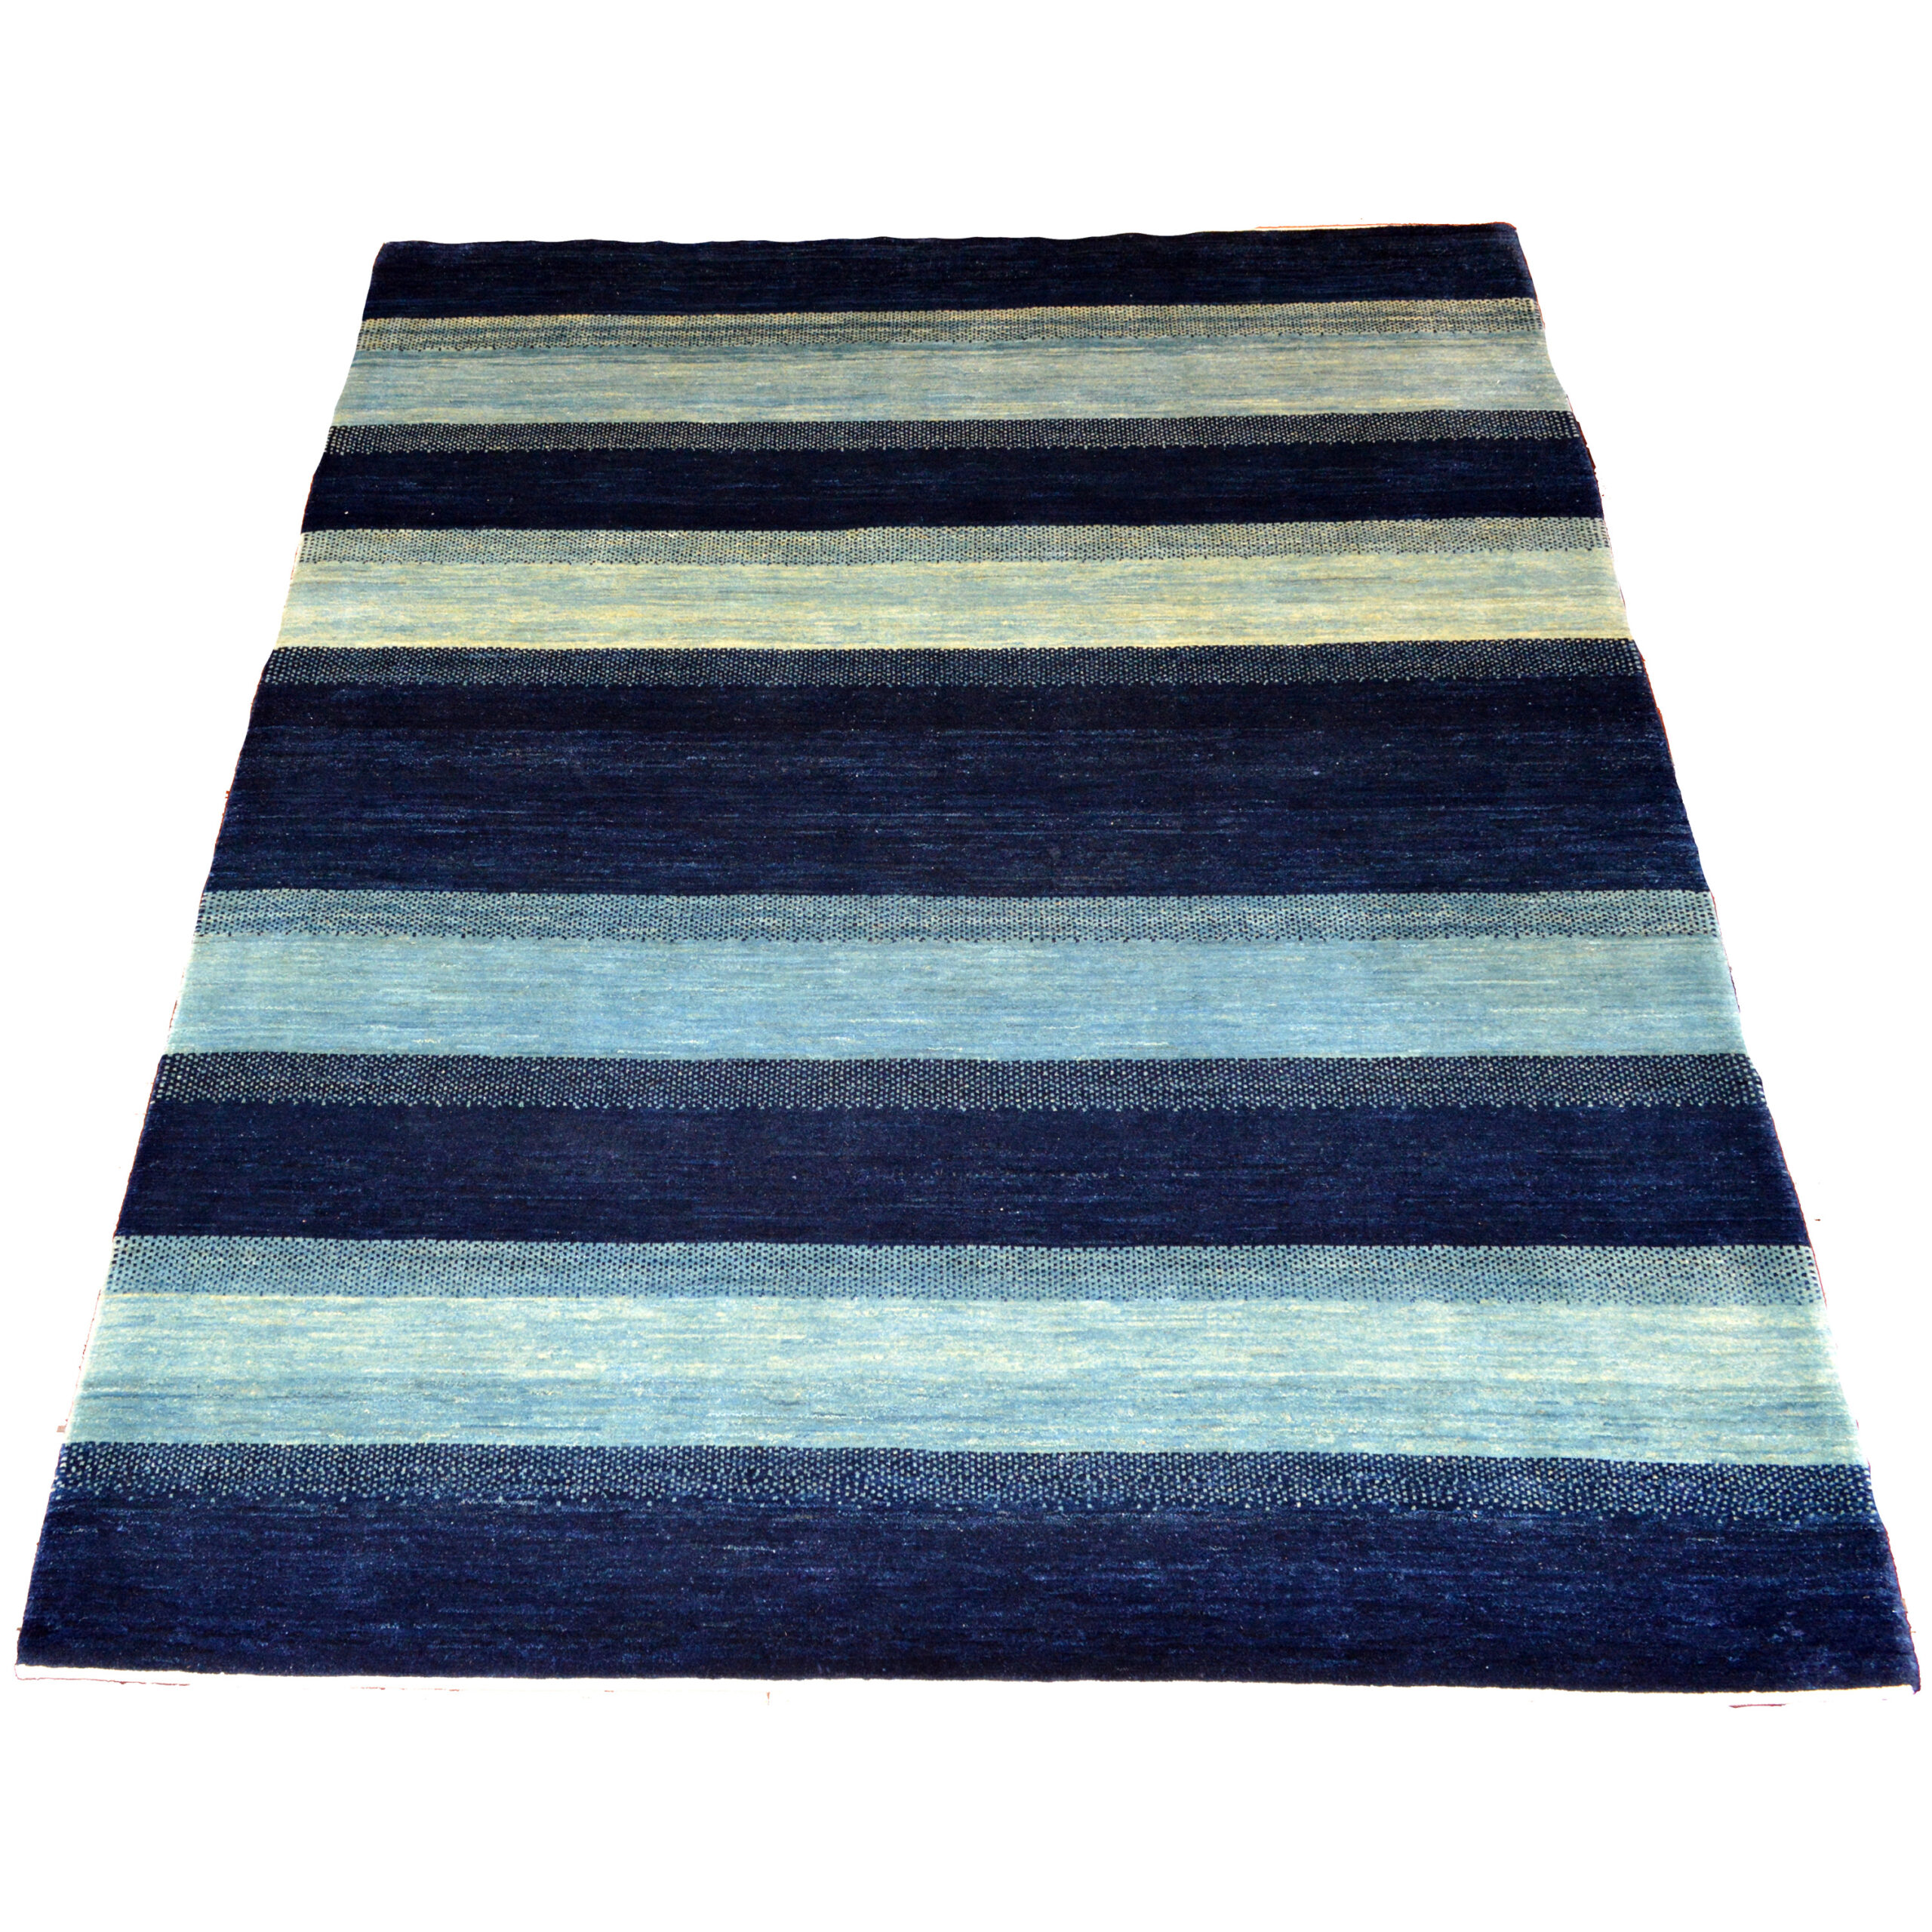 A modern hand woven Kashkuli rug featuring natural dyes with variegated blue horizontal stripes. This ru would be a great choice for a home near the ocean in Nantucket, Cape Cod, The Hamptons, Palm Beach Coastal New England or Los Angeles. Boston area rug specialists Helen and Douglas Stock of Douglas Stock Gallery offer a selection of contemporary hand woven Oriental rugs, plus a wide selection of antique rugs. Modern rugs Boston,MA area, Contemporary rugs Boston,MA area New England, contemporary rugs New York by appointment